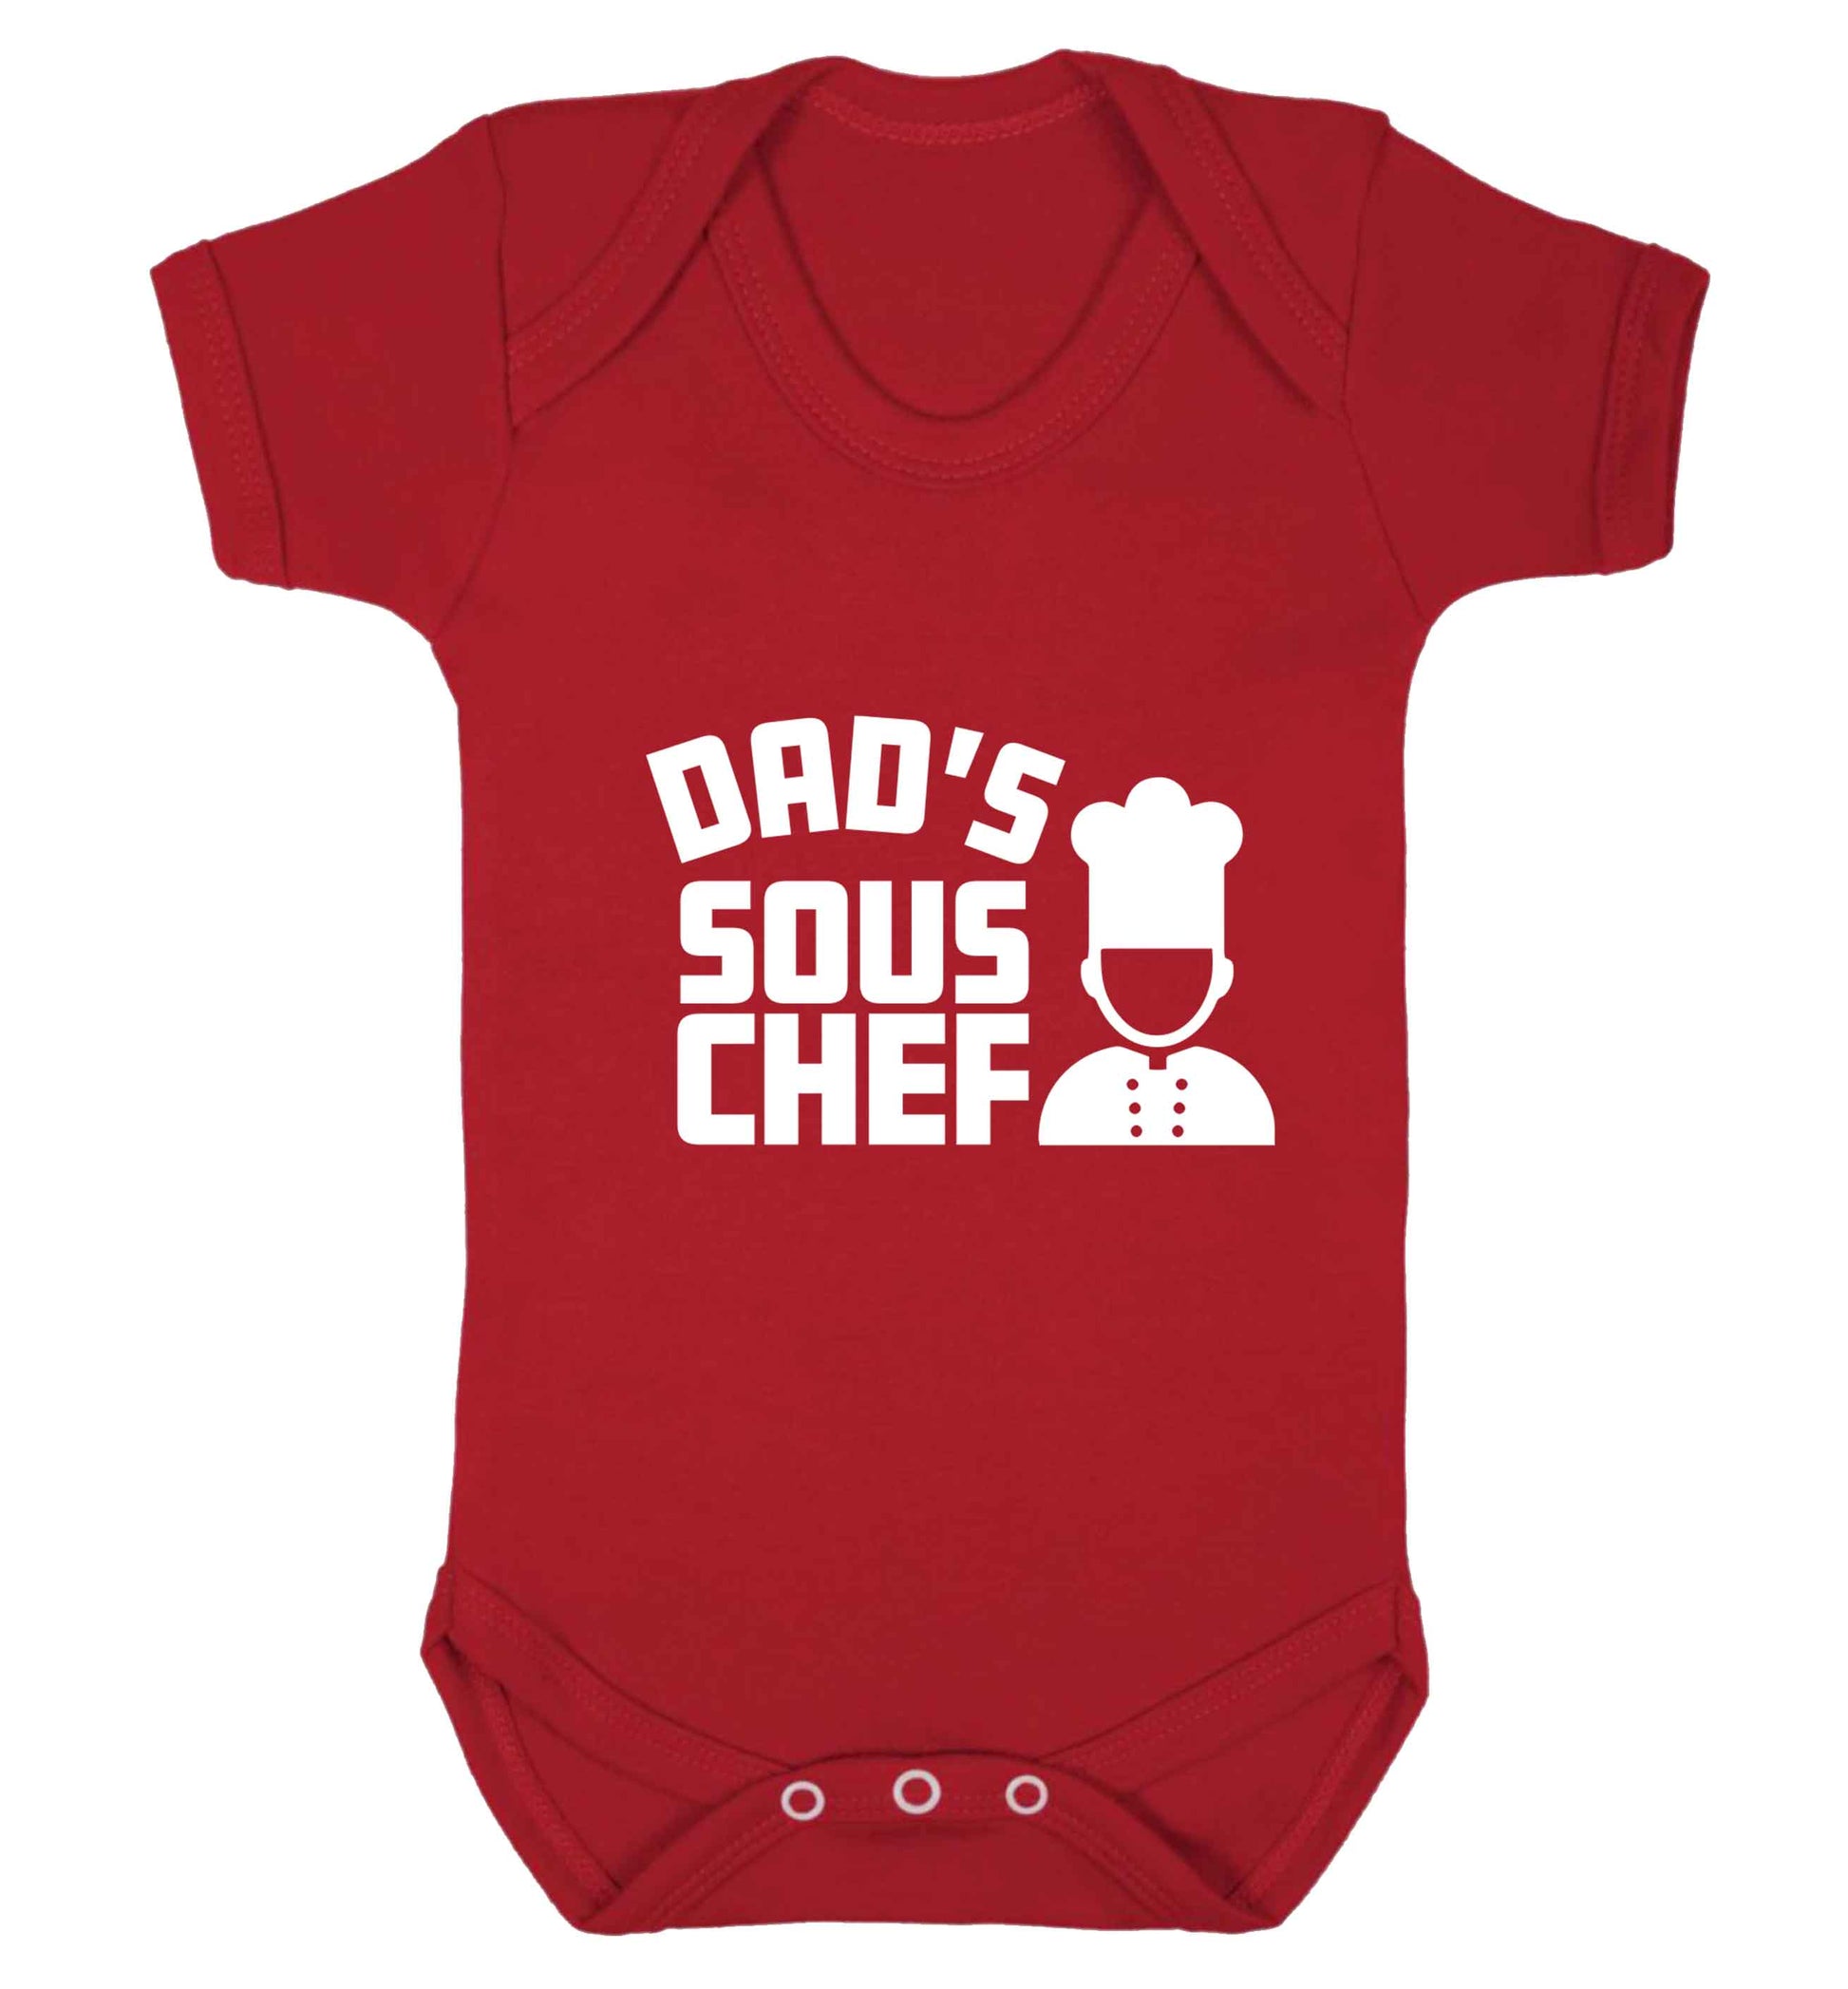 Dad's sous chef baby vest red 18-24 months